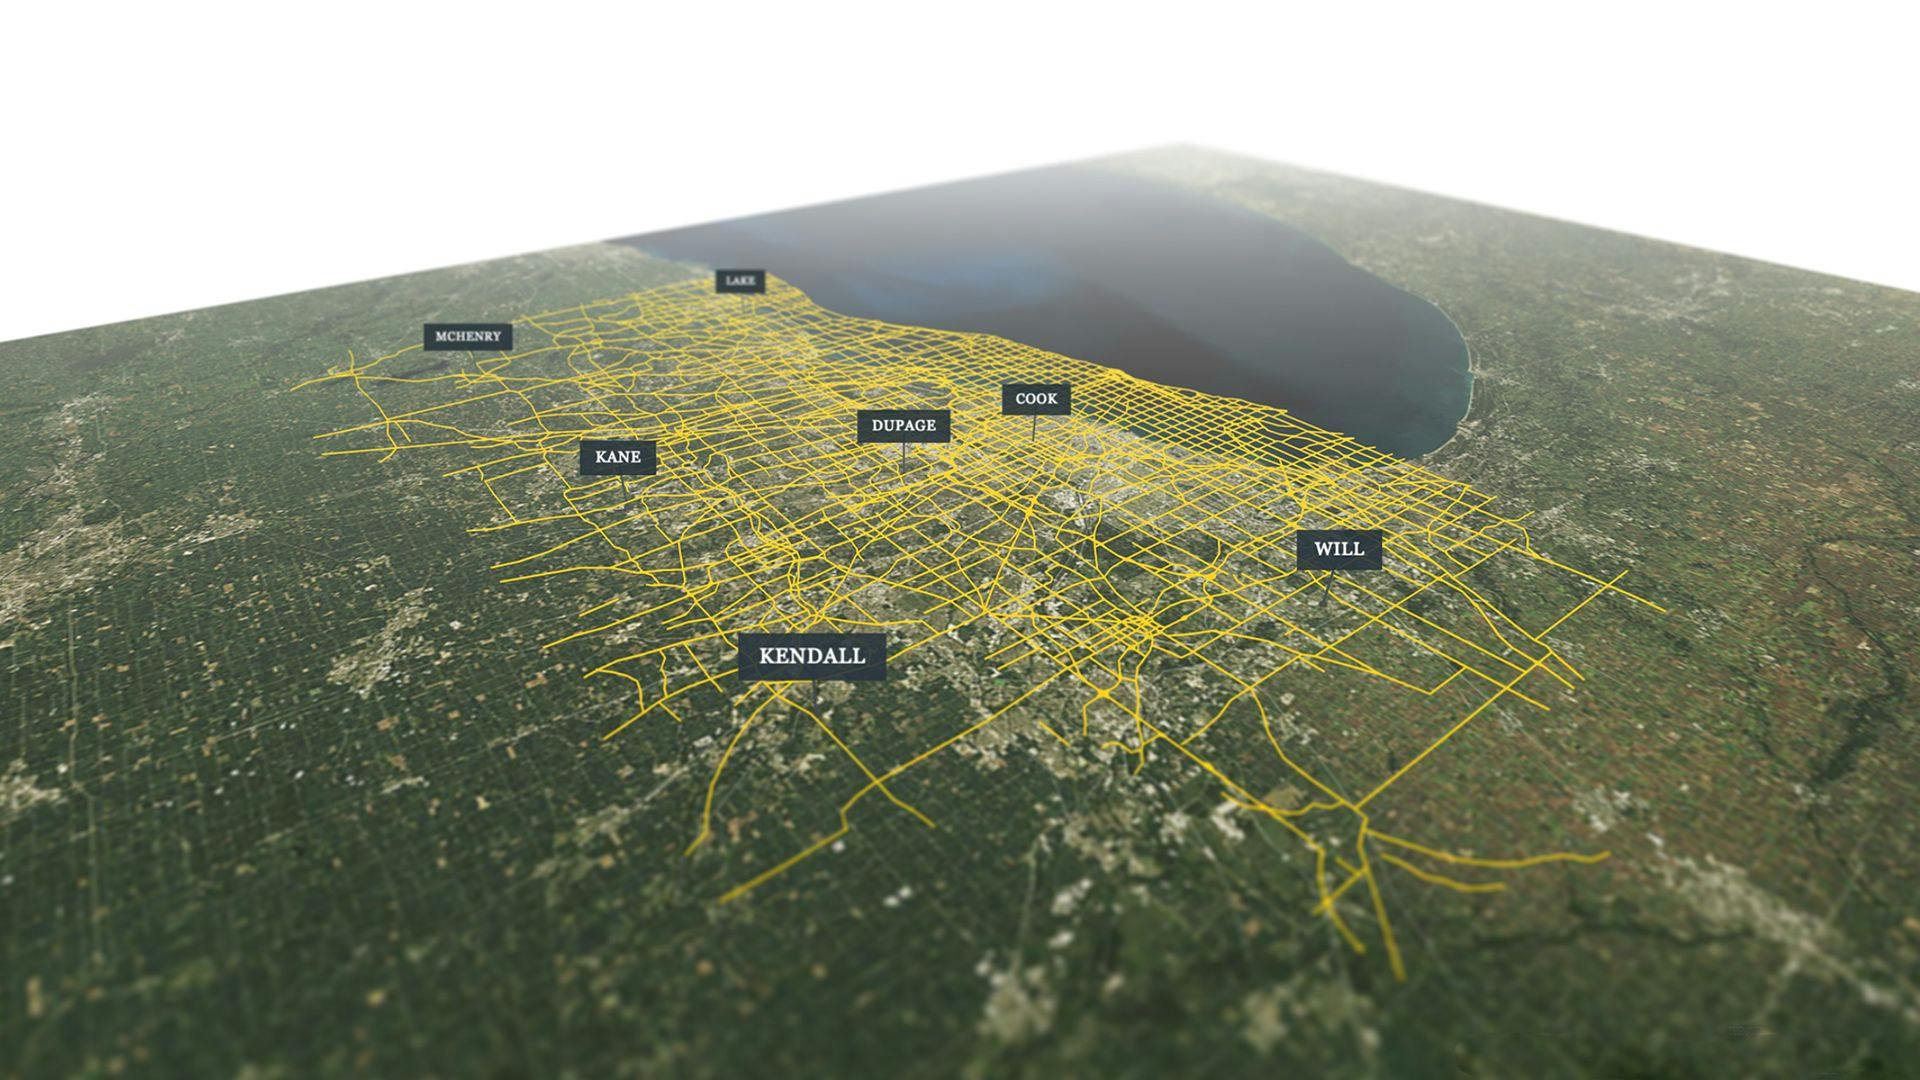 Image for next project, Chicago’s Mobility microsite